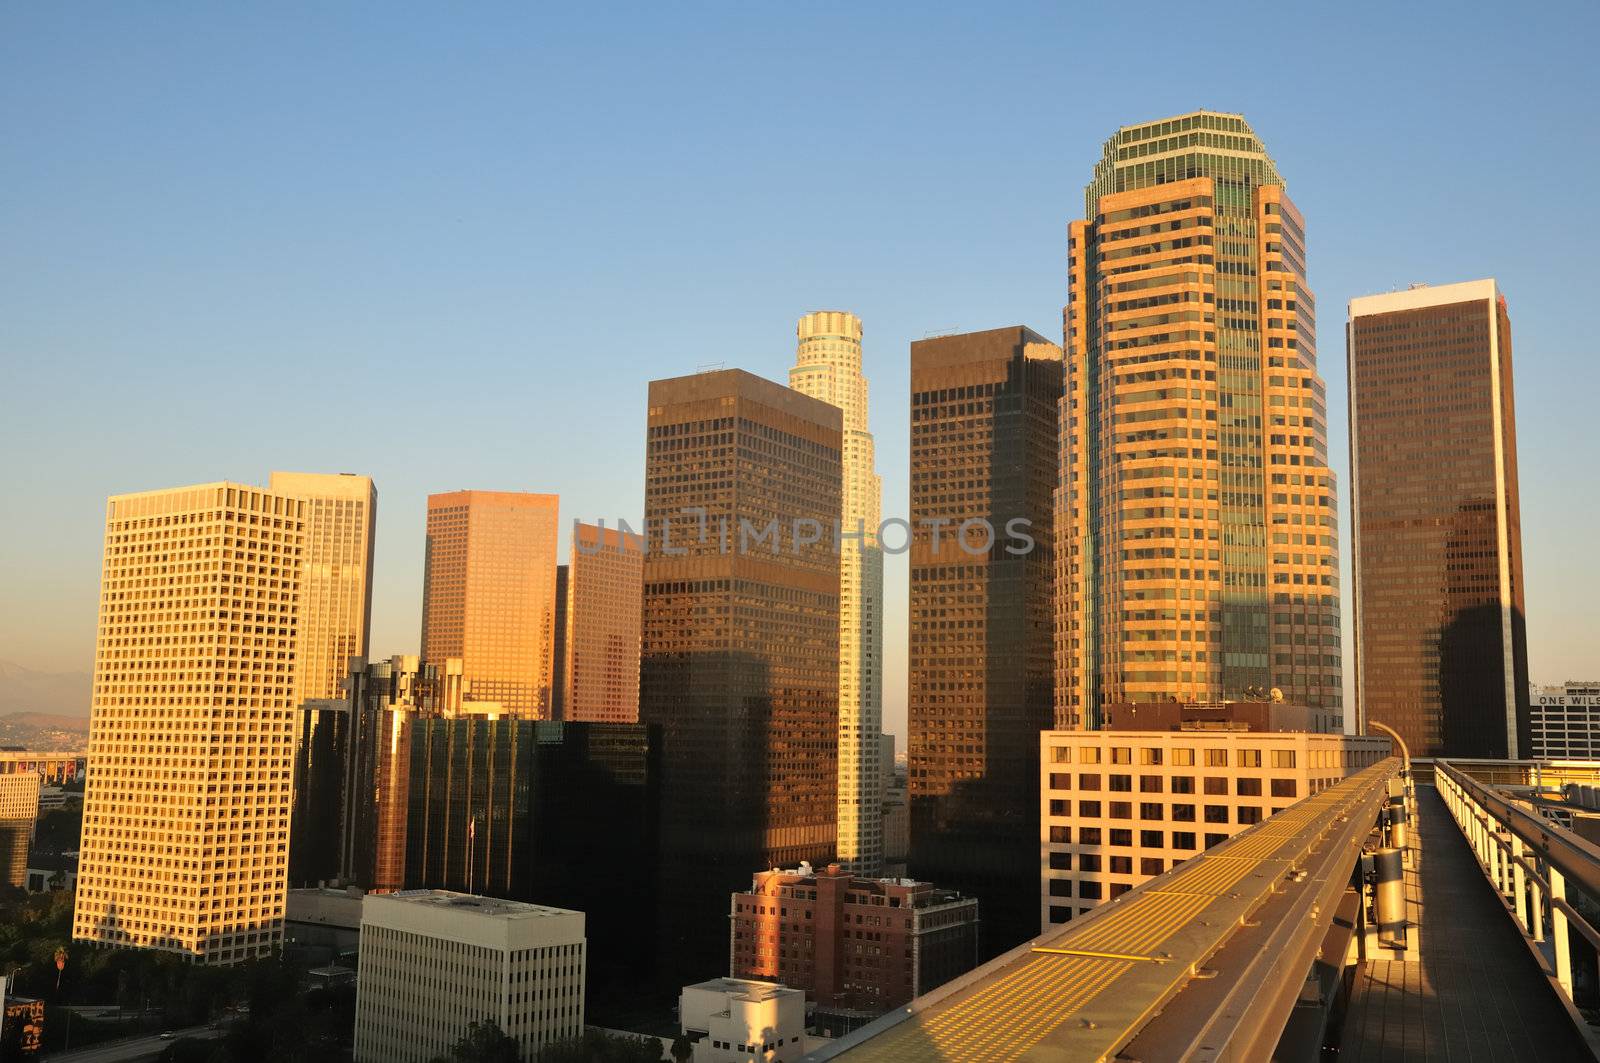 Skyscrapers tower over a rooftop walkway in downtown Los Angeles